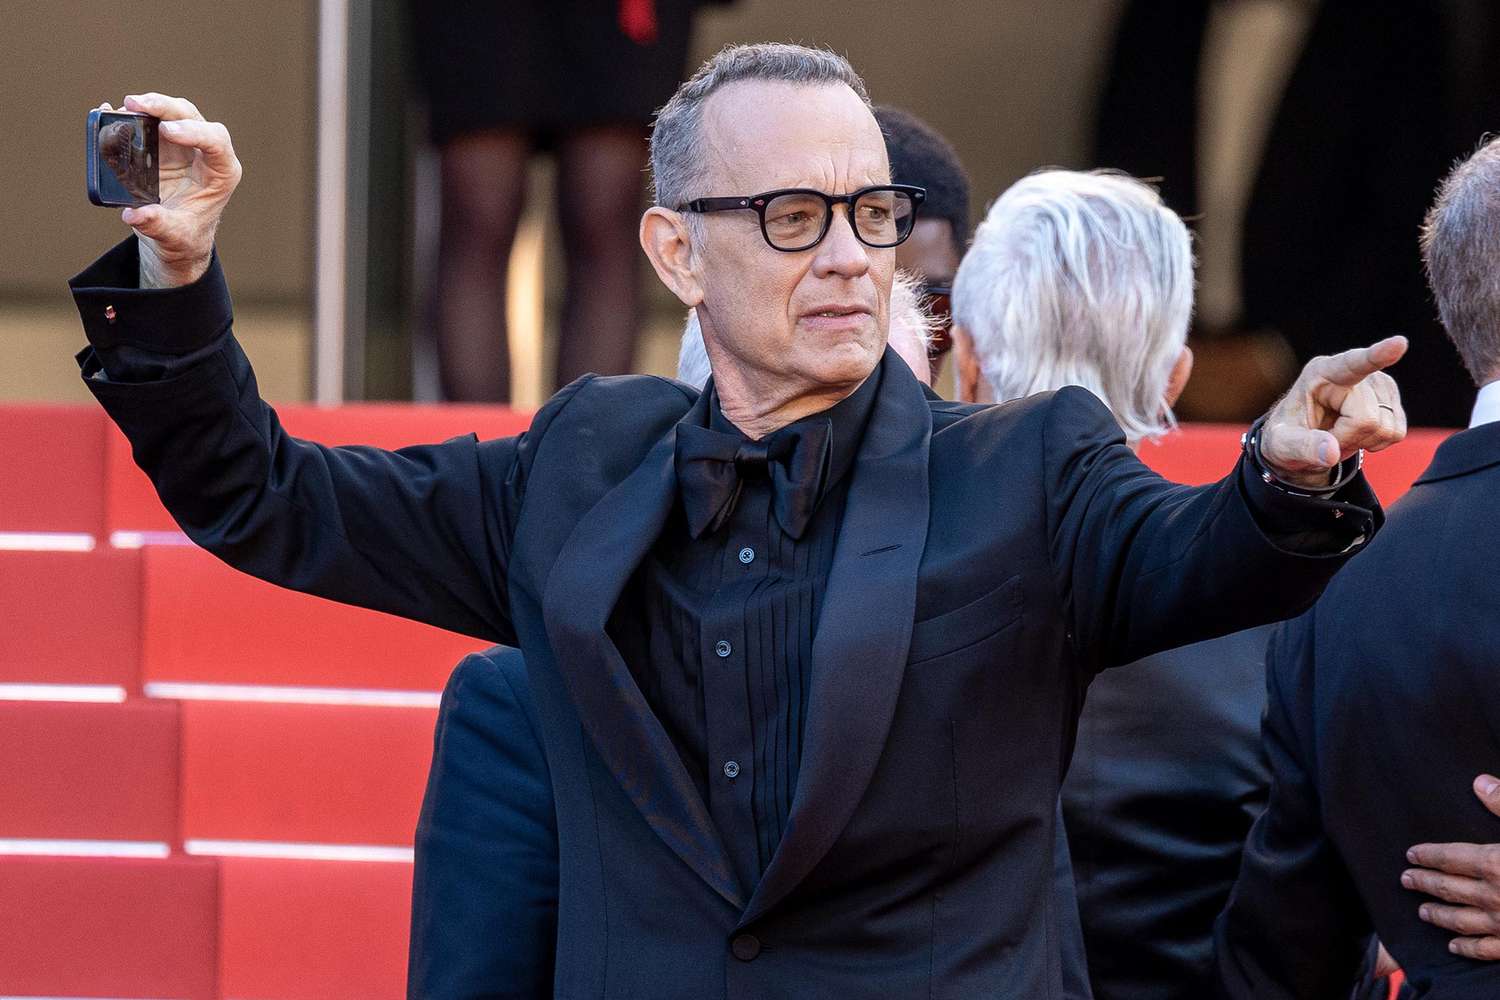 Actor Tom Hanks attends the screening of "Elvis" during the 75th annual Cannes film festival at Palais des Festivals on May 25, 2022 in Cannes, France.